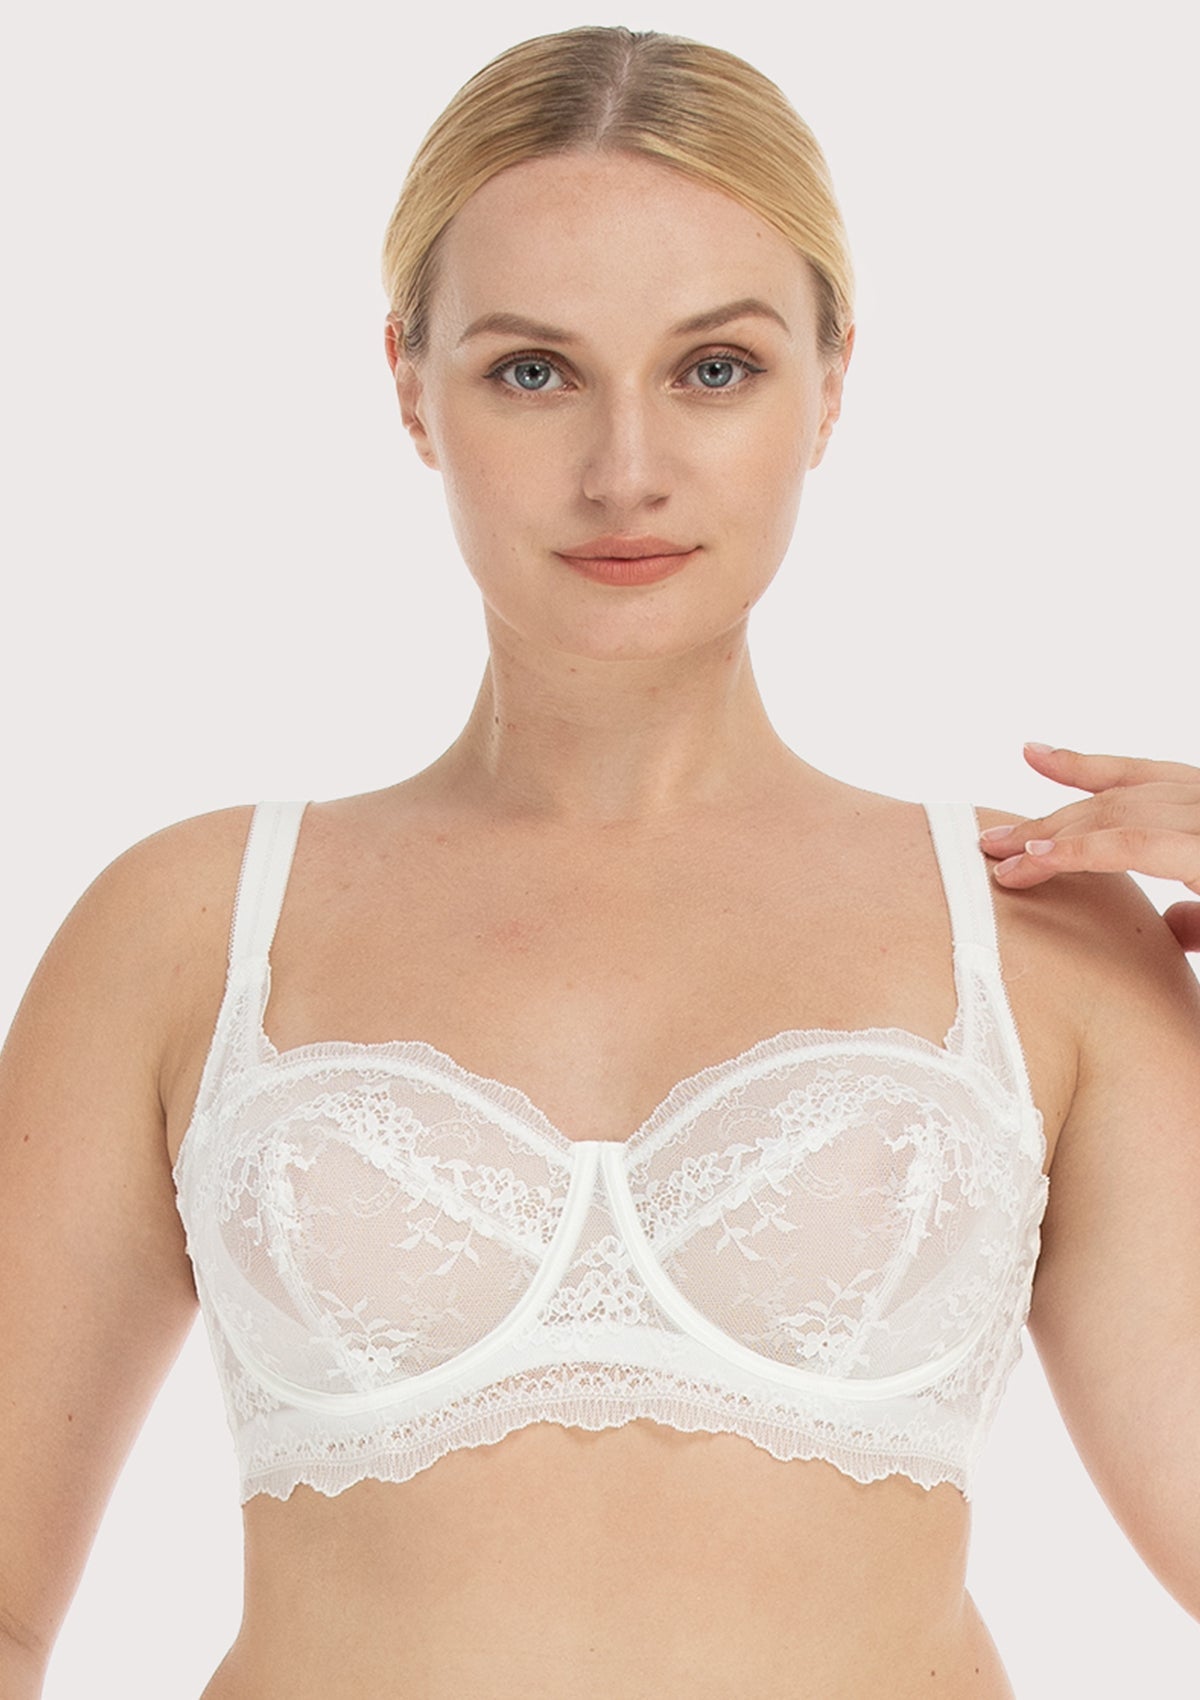 HSIA I Do Floral Lace Bridal Balconette Beautiful Bra For Special Day - Burgundy / 36 / DDD/F